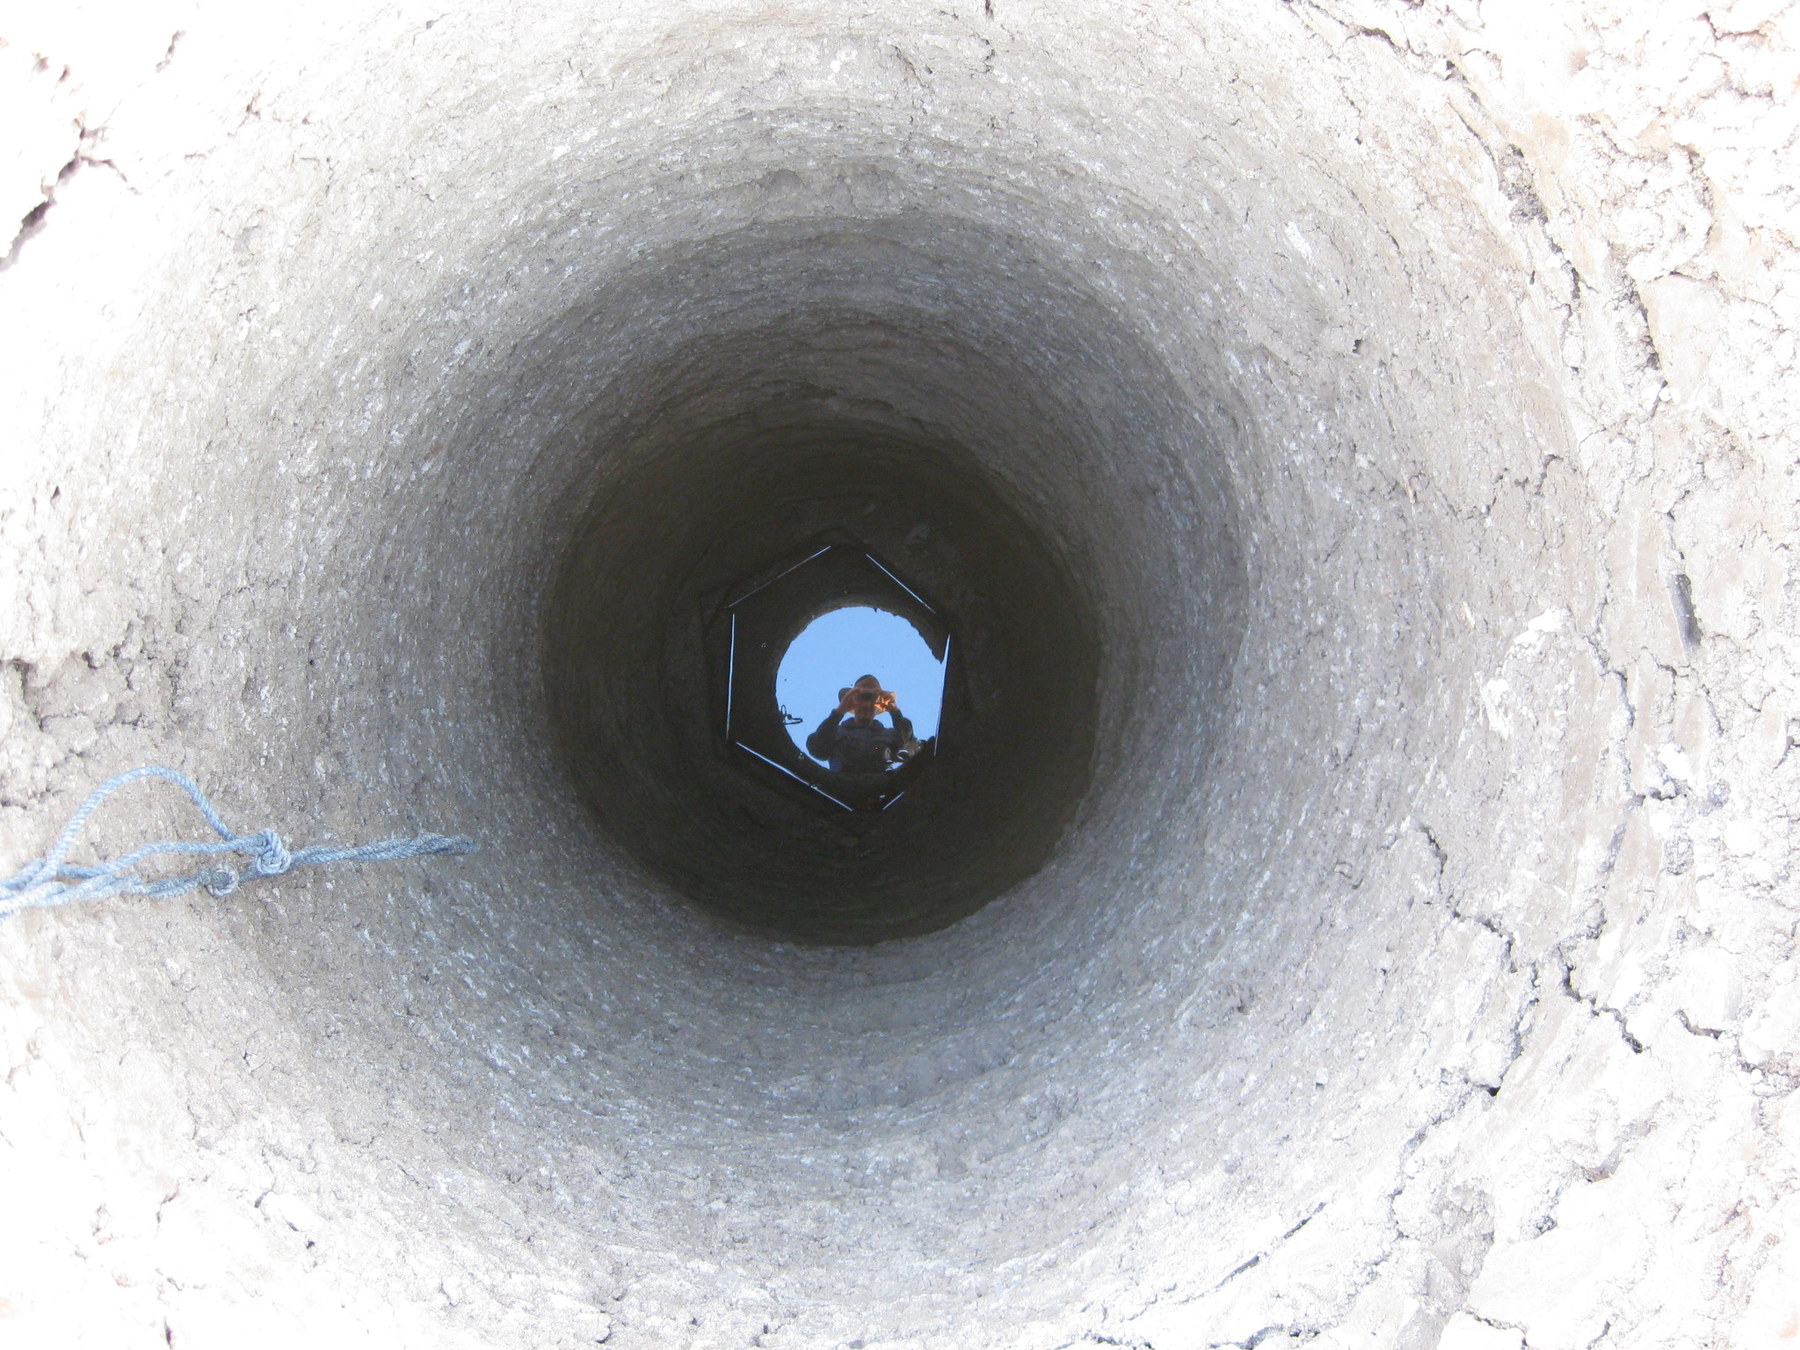 Digging out a dry well